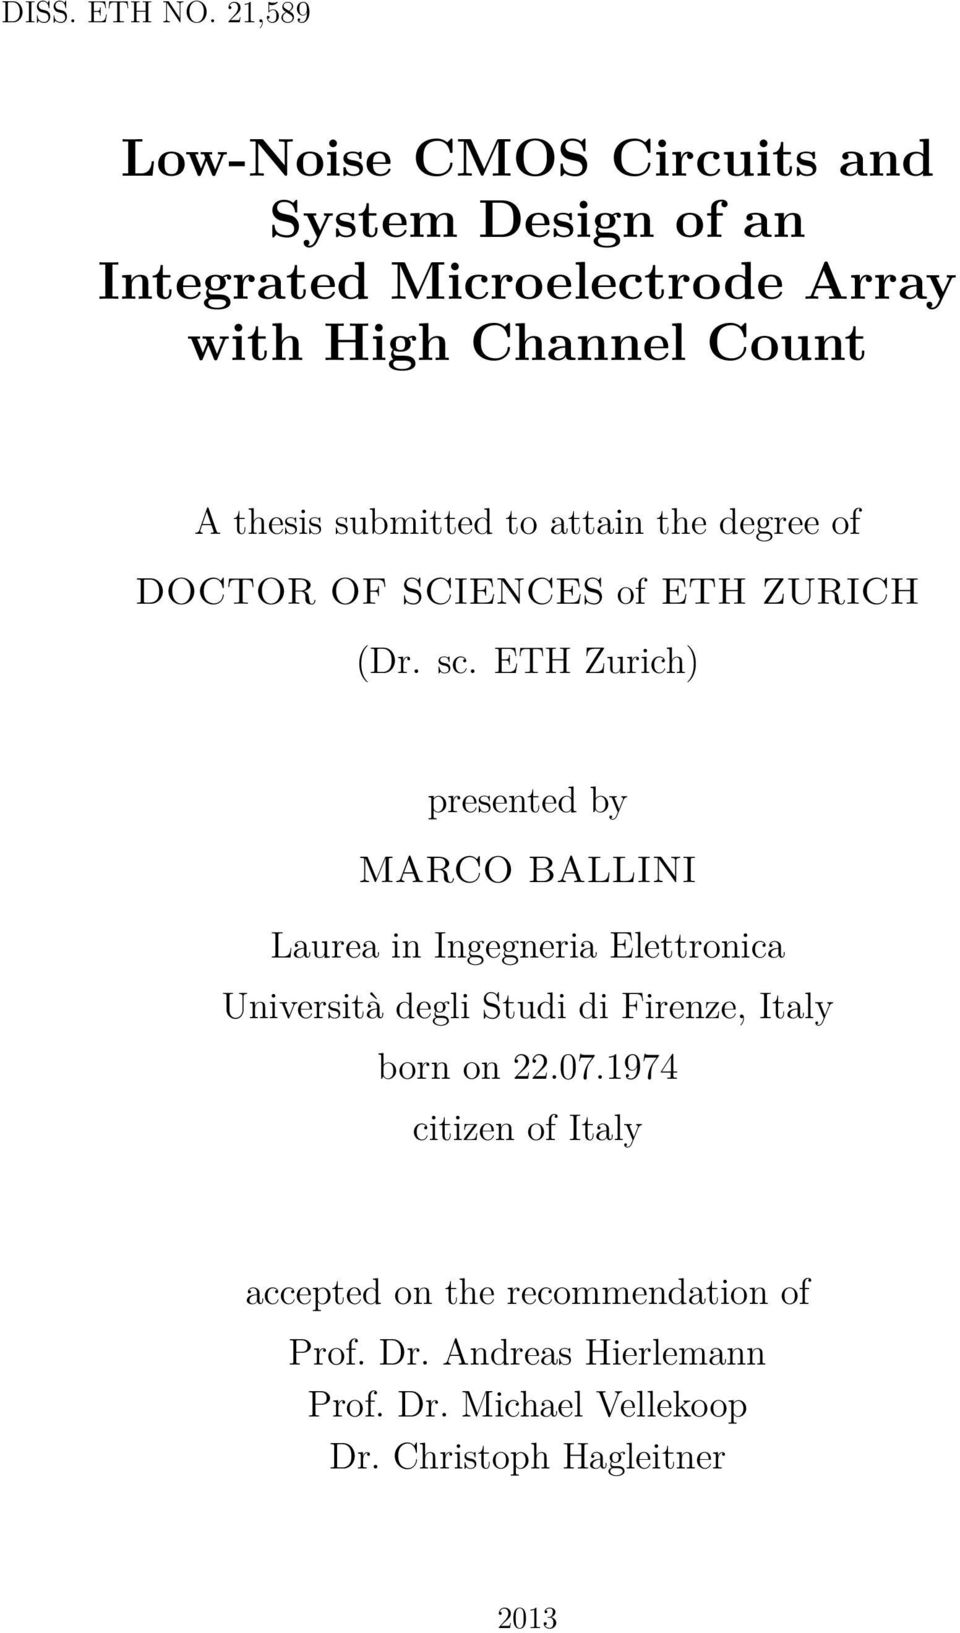 submitted to attain the degree of DOCTOR OF SCIENCES of ETH ZURICH (Dr. sc.